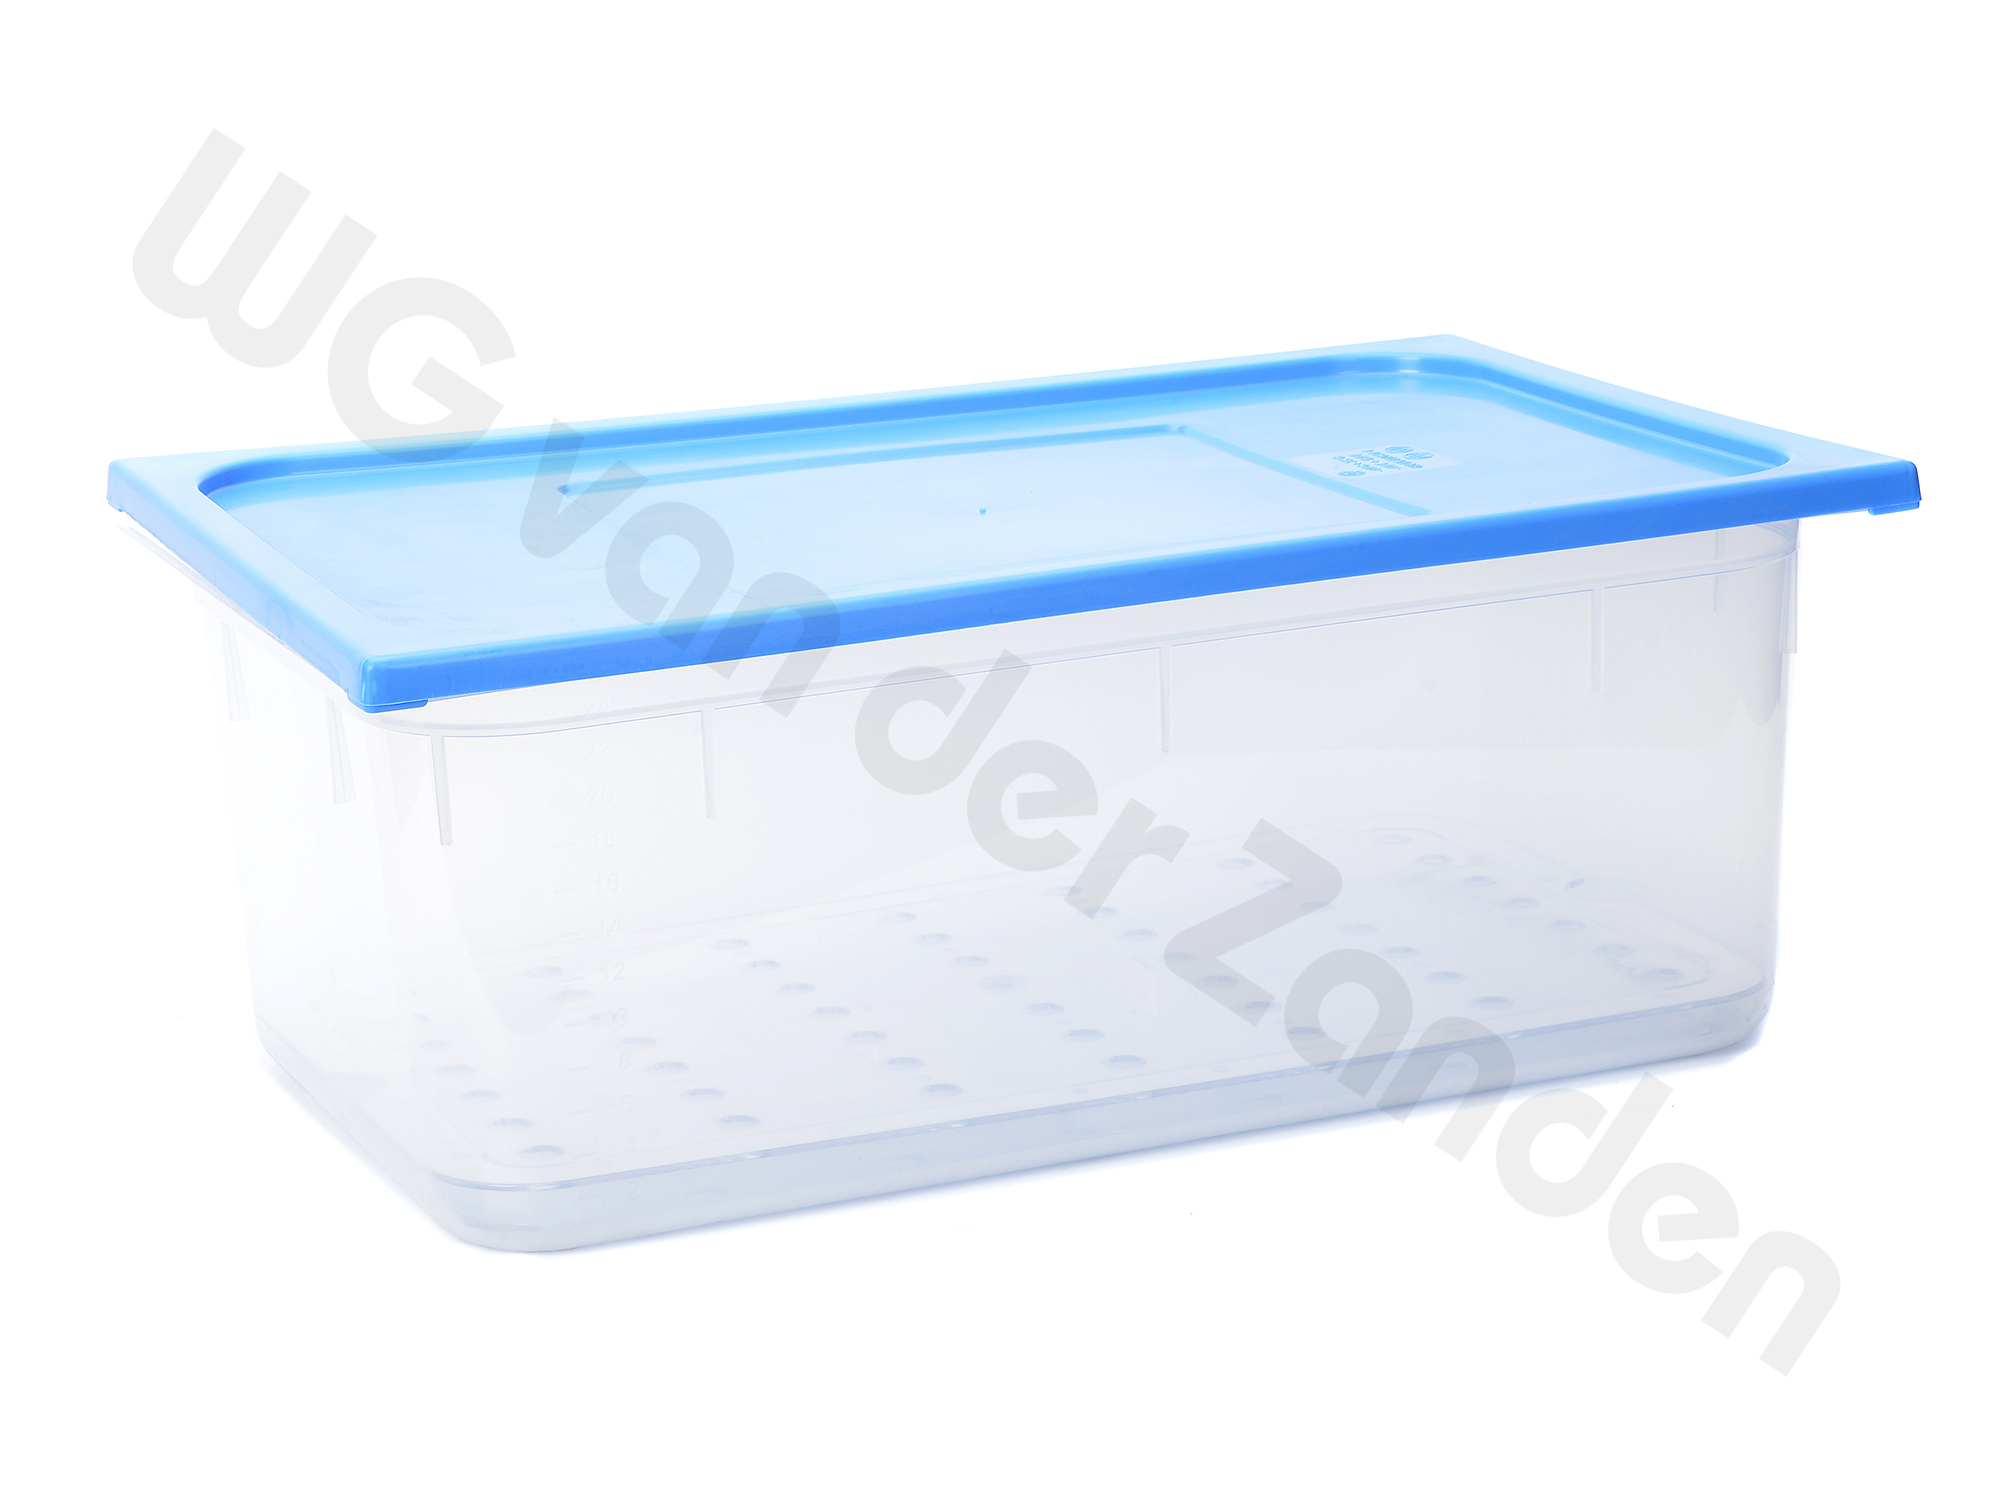 BP1052 THAWING CONTAINER PLASTIC WITH GRID / BLUE LID 53X32.5X20CM